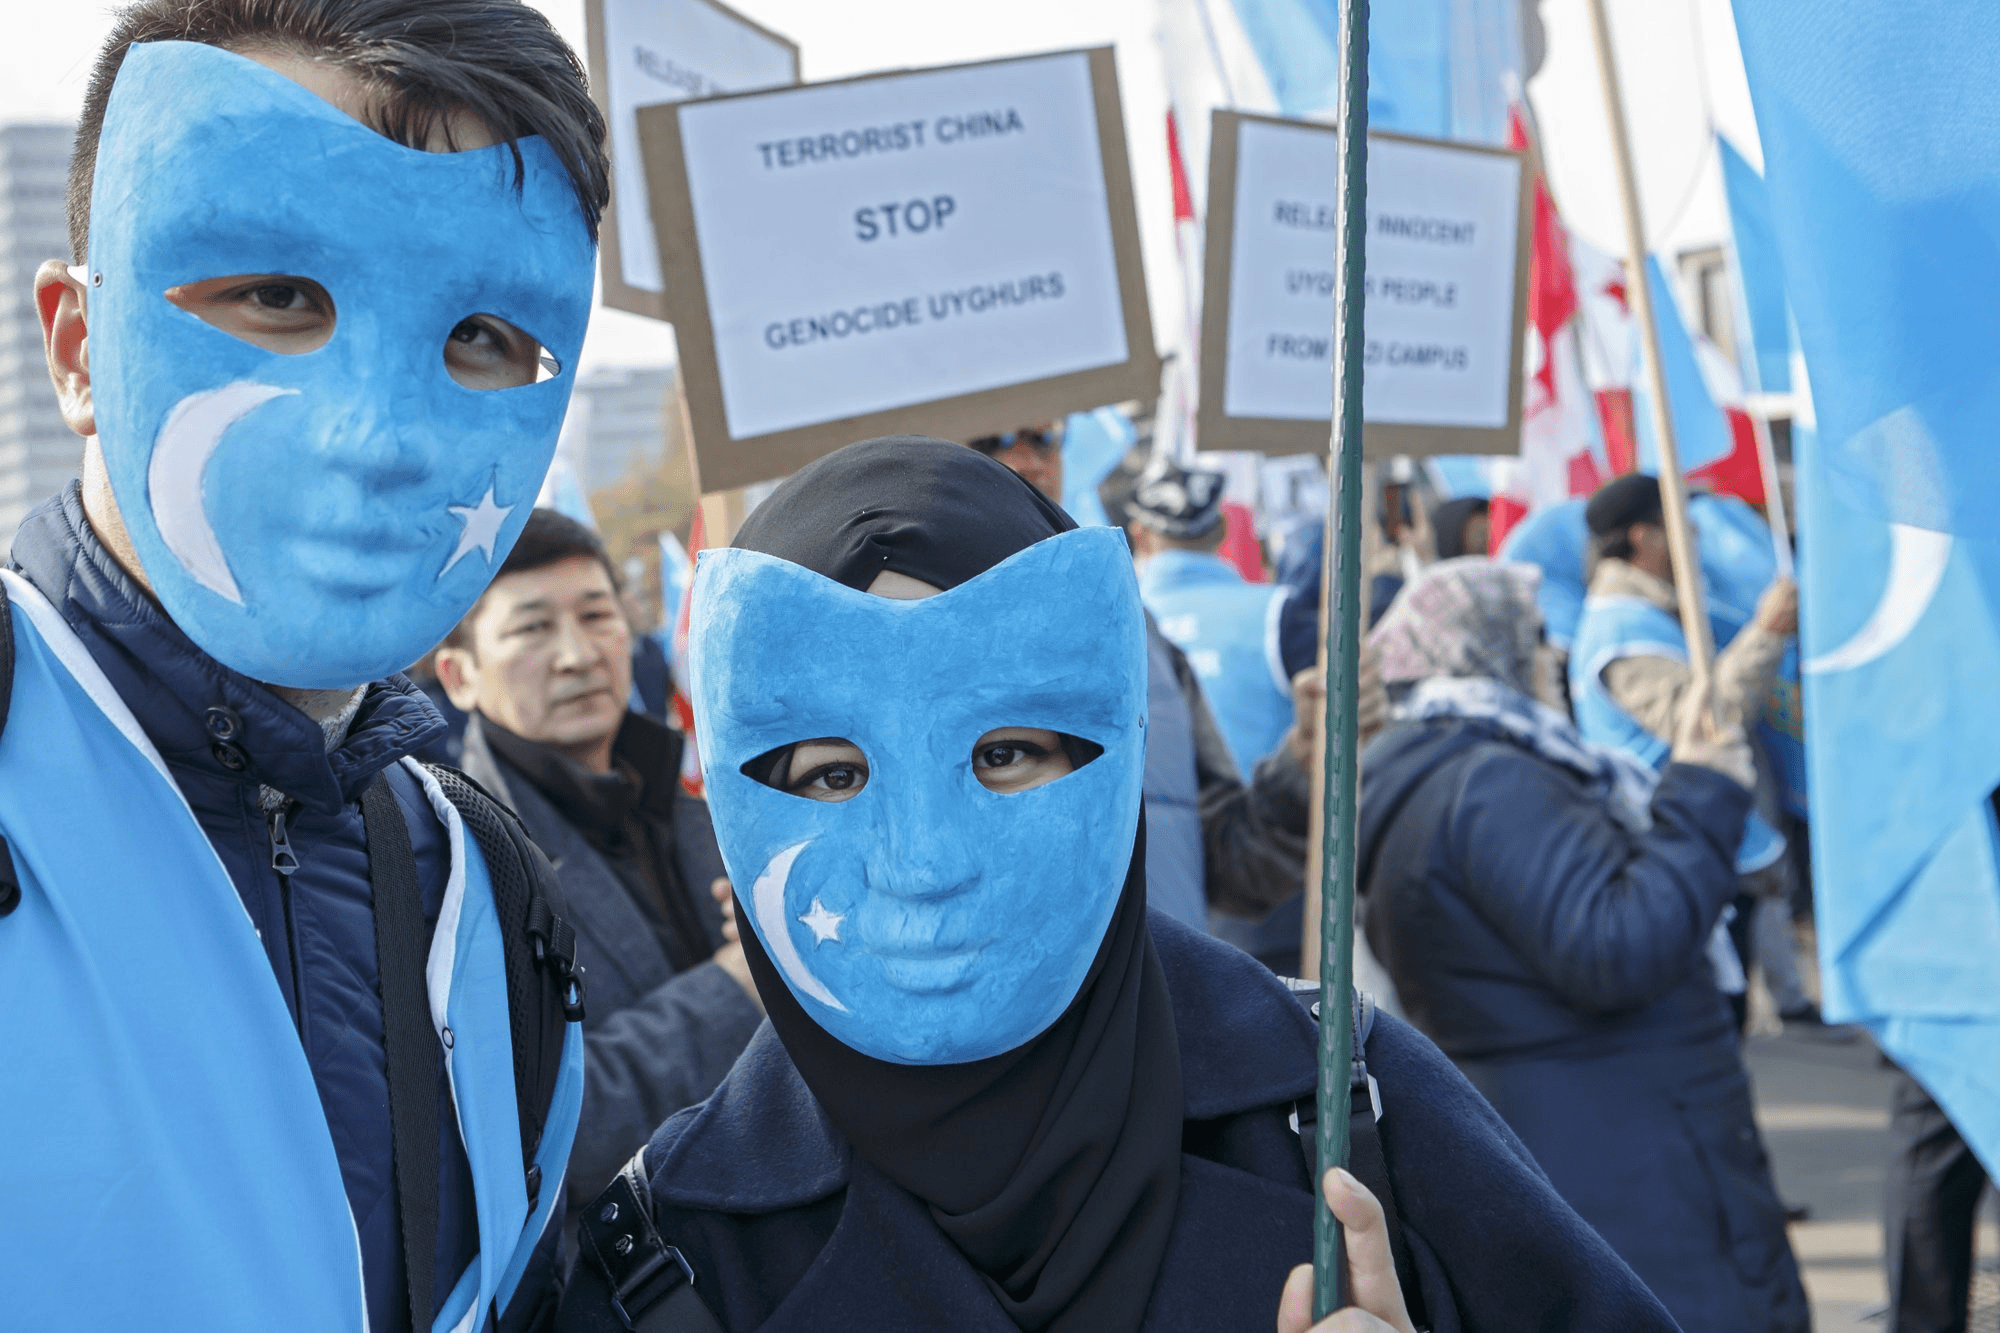 image - How Detainment of Uyghur Muslims Can Lead to Violent Extremism